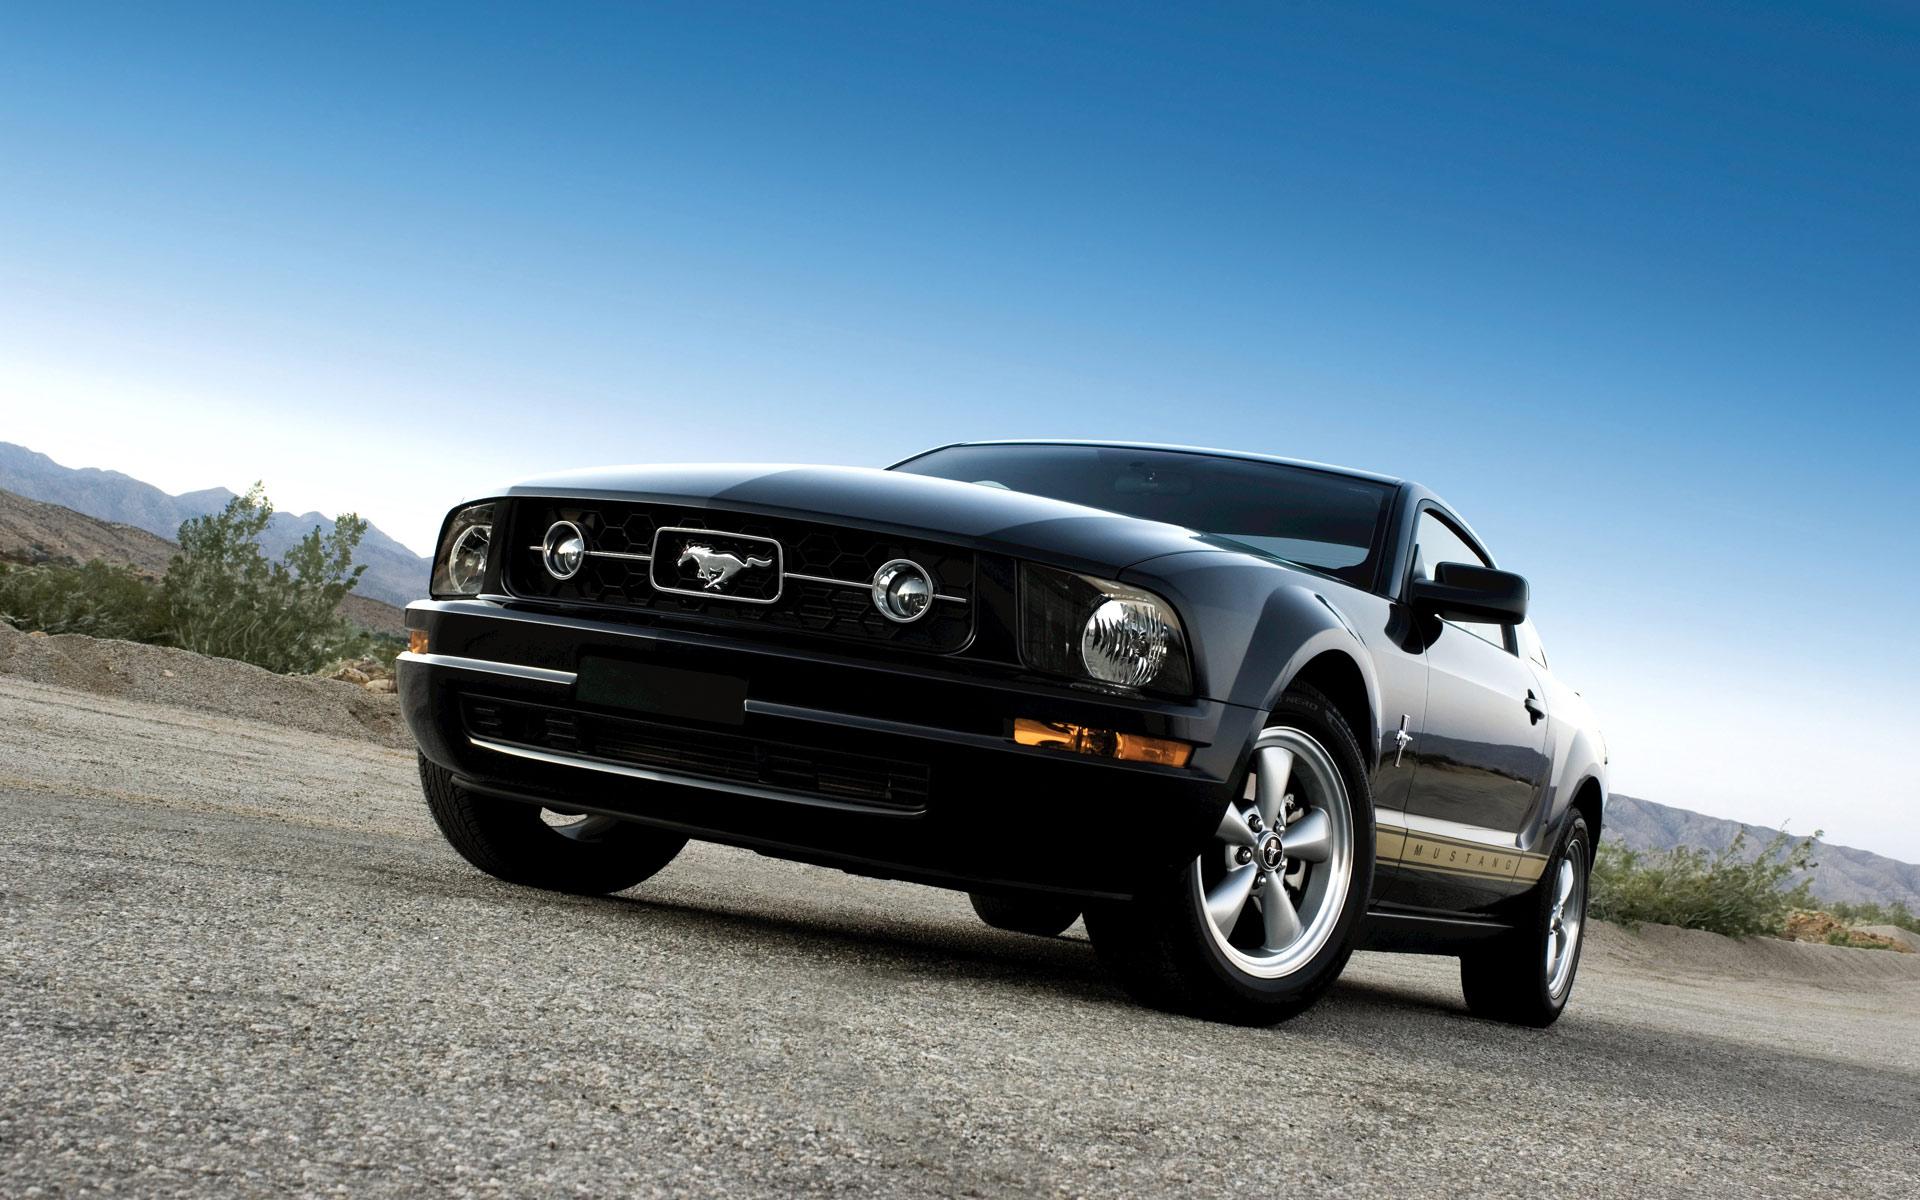 Black Mustang Gt Wallpaper Image In Collection